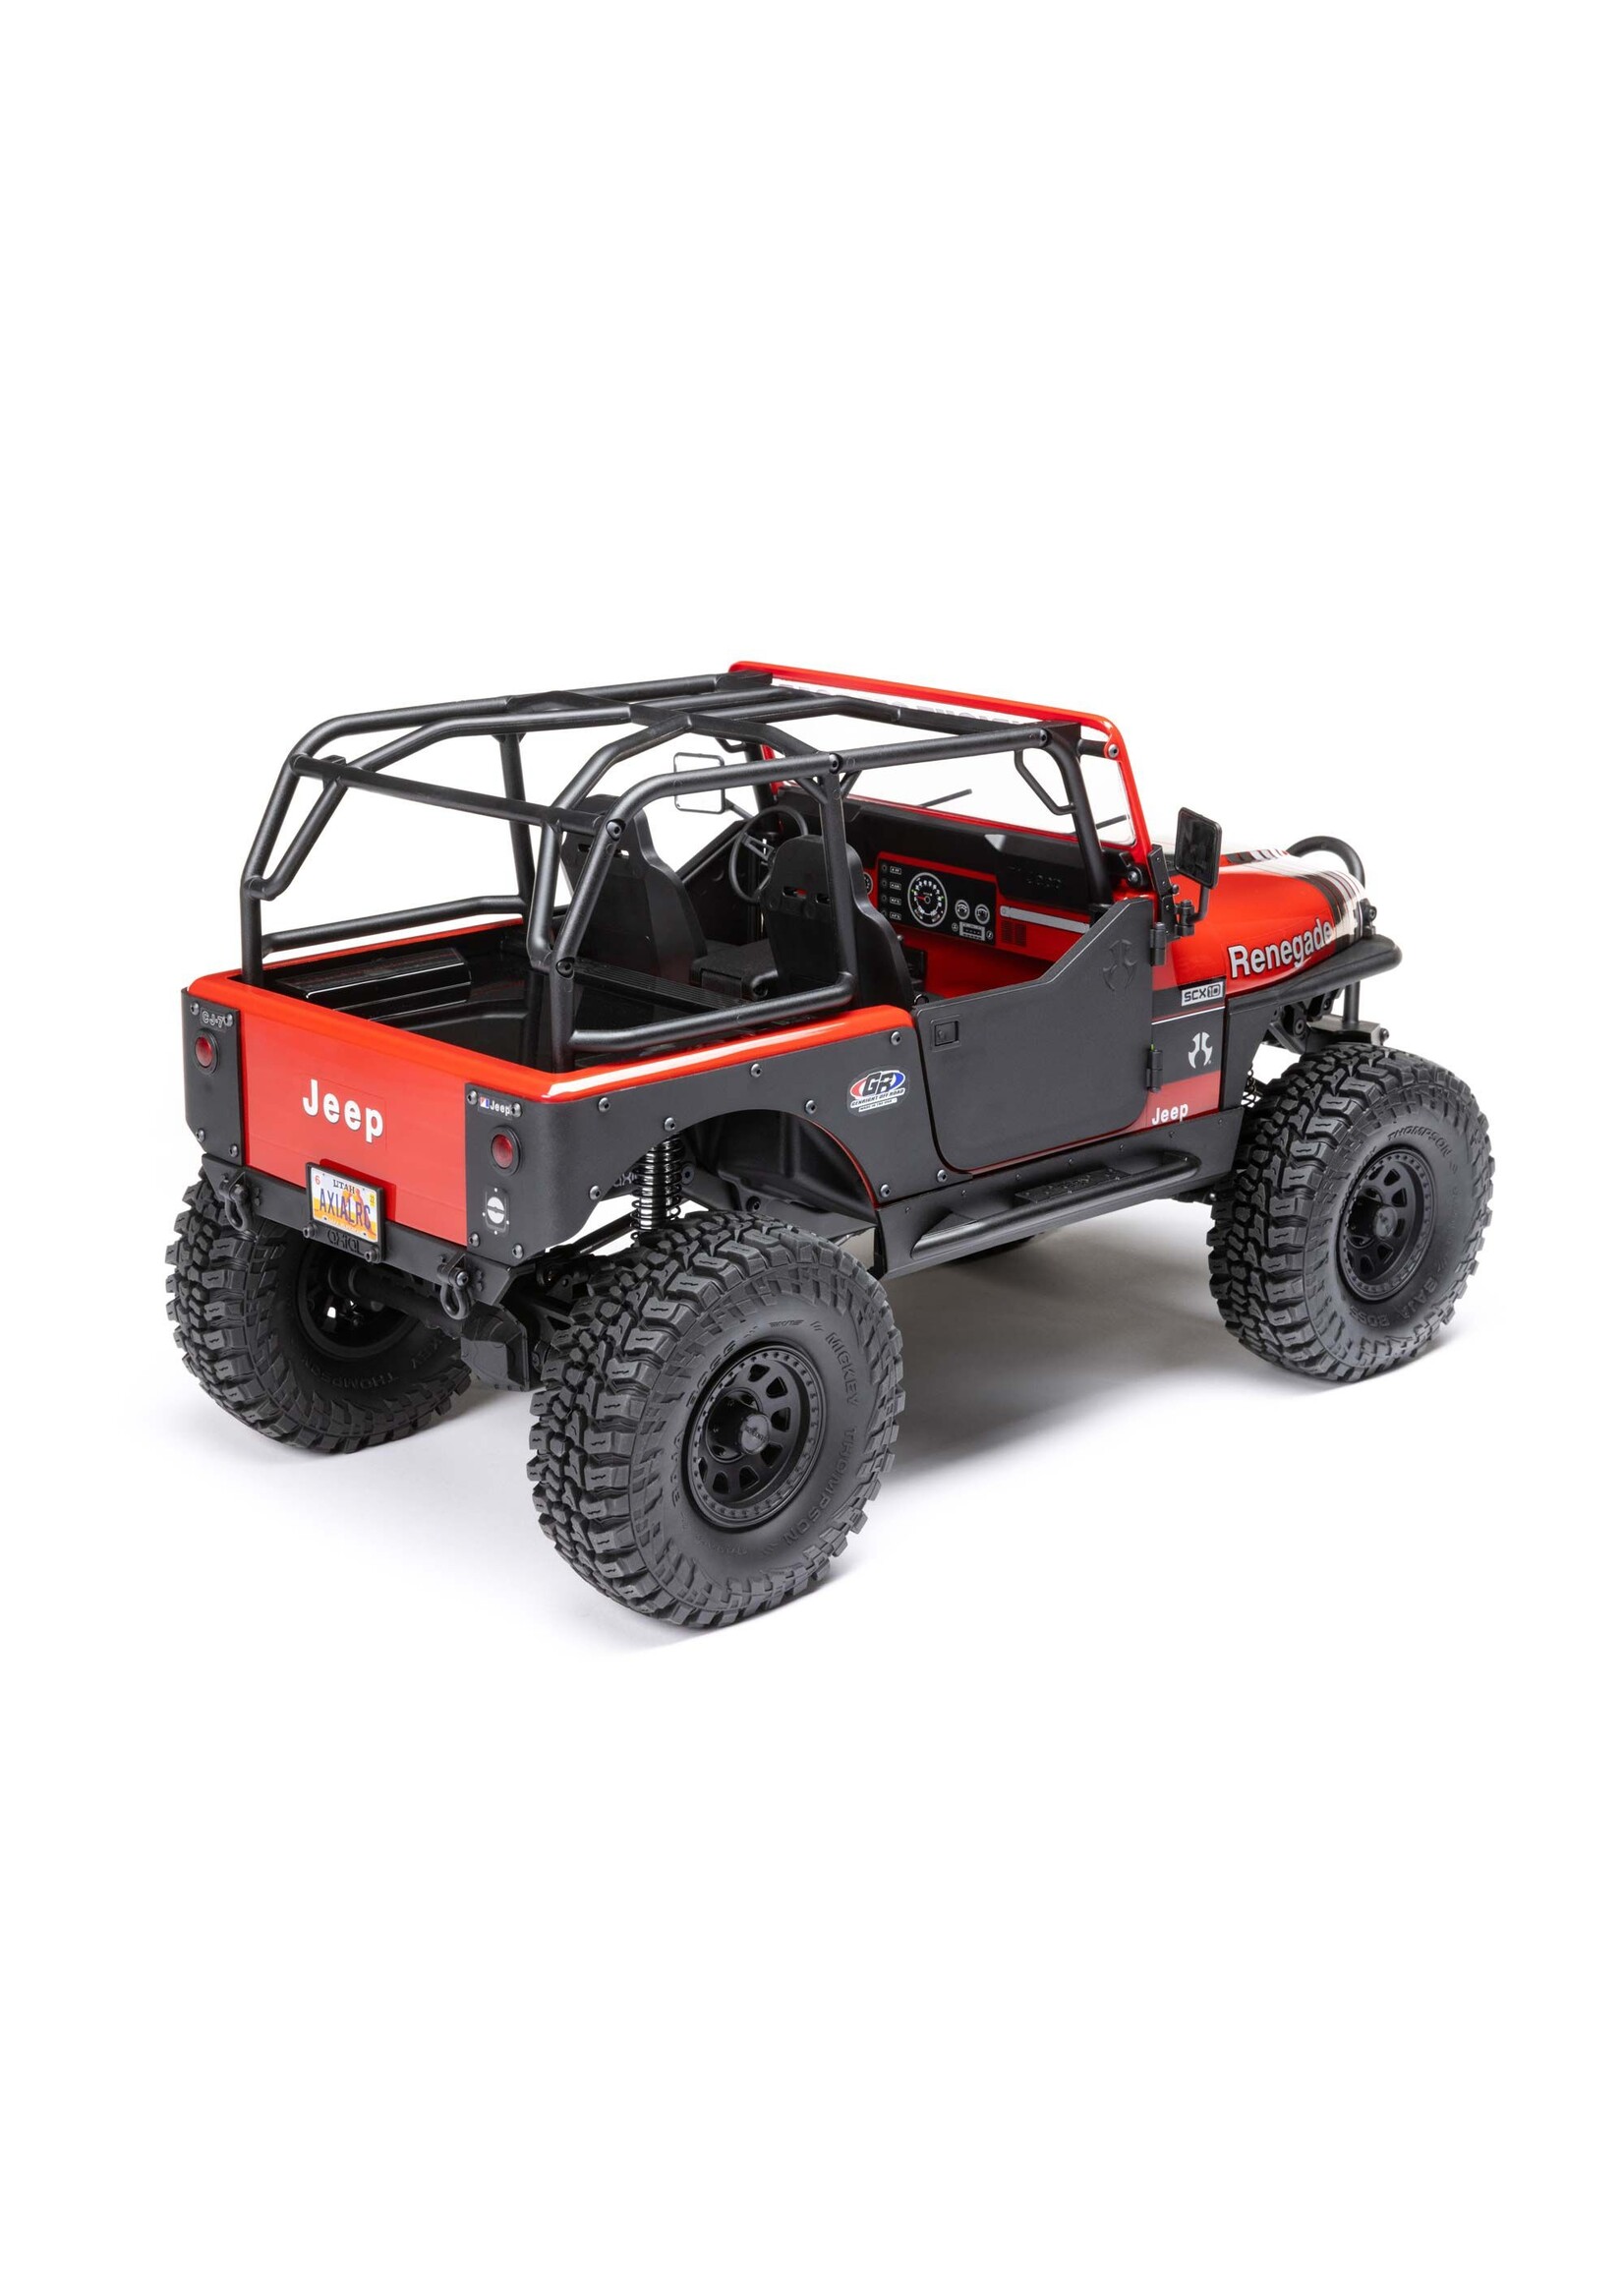 Axial AXI03008 Axial 1/10 SCX10 III Jeep CJ-7 4WD Brushed RTR